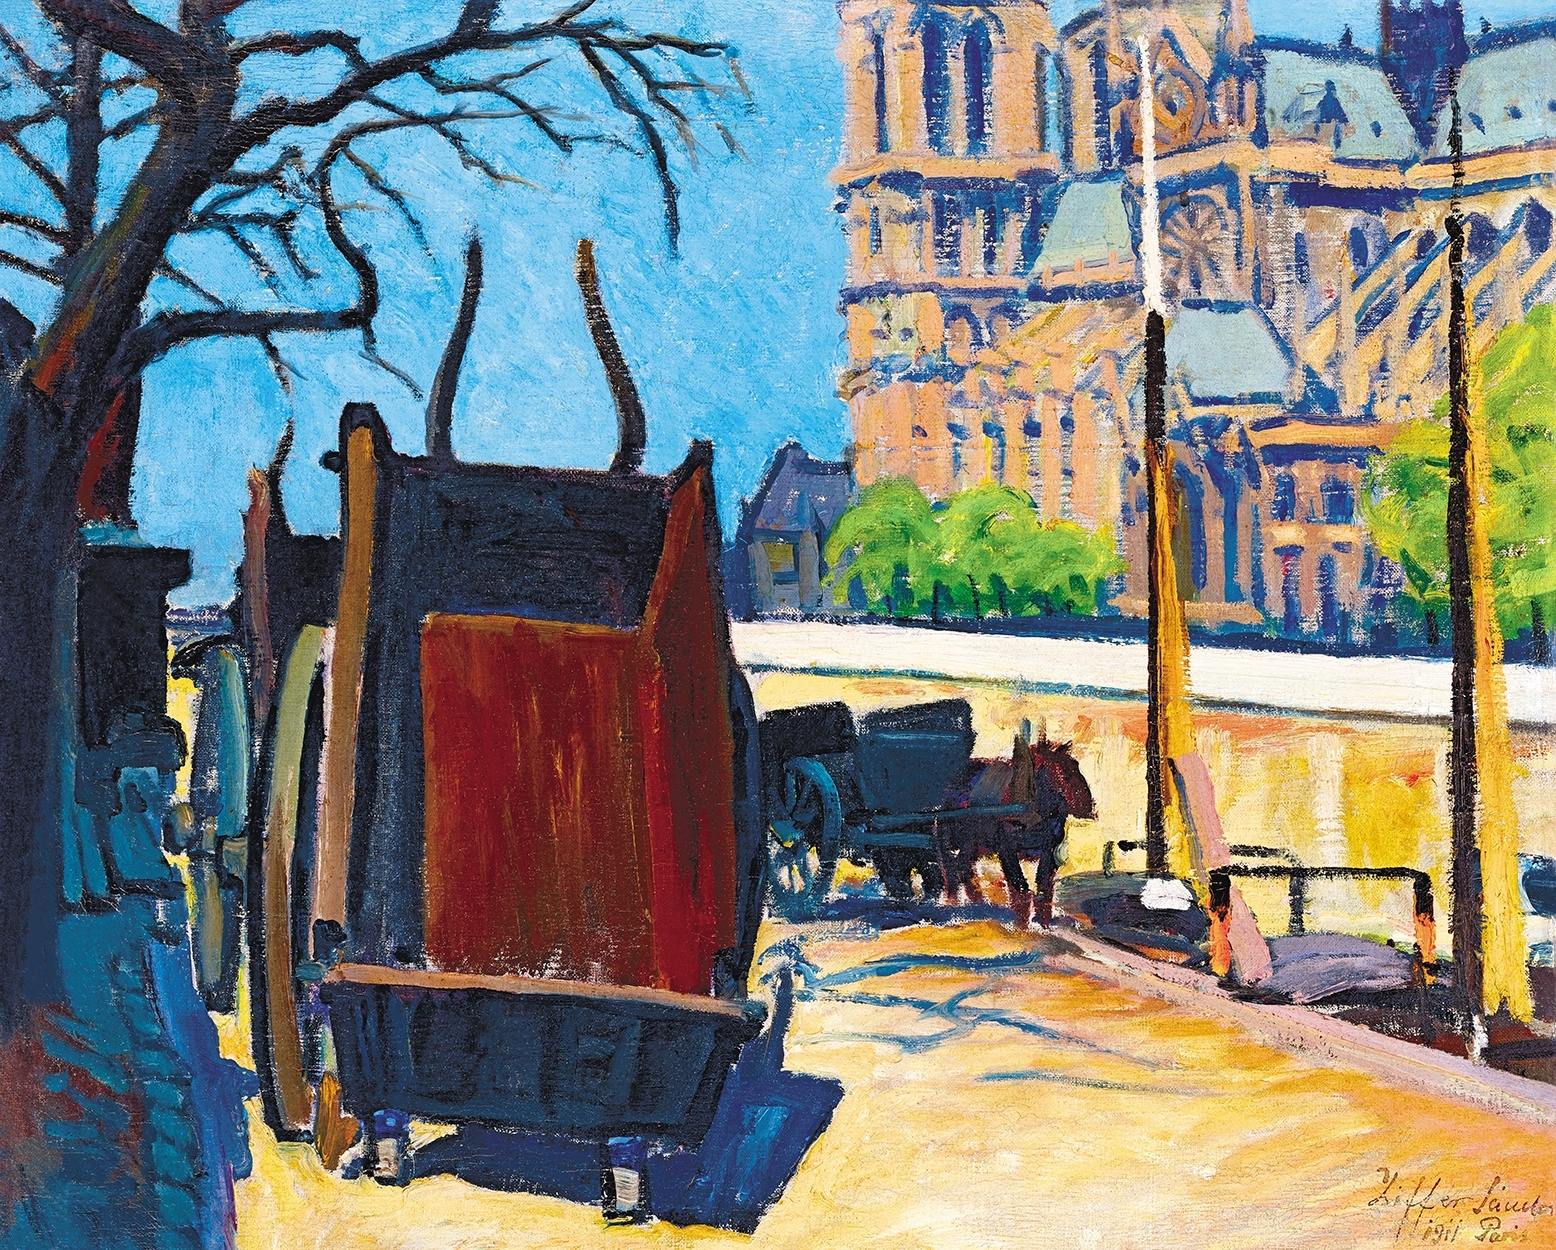 Ziffer Sándor (1880-1962) Horse carriages (Port de Montebello with the Notre Dame in the background), 1911